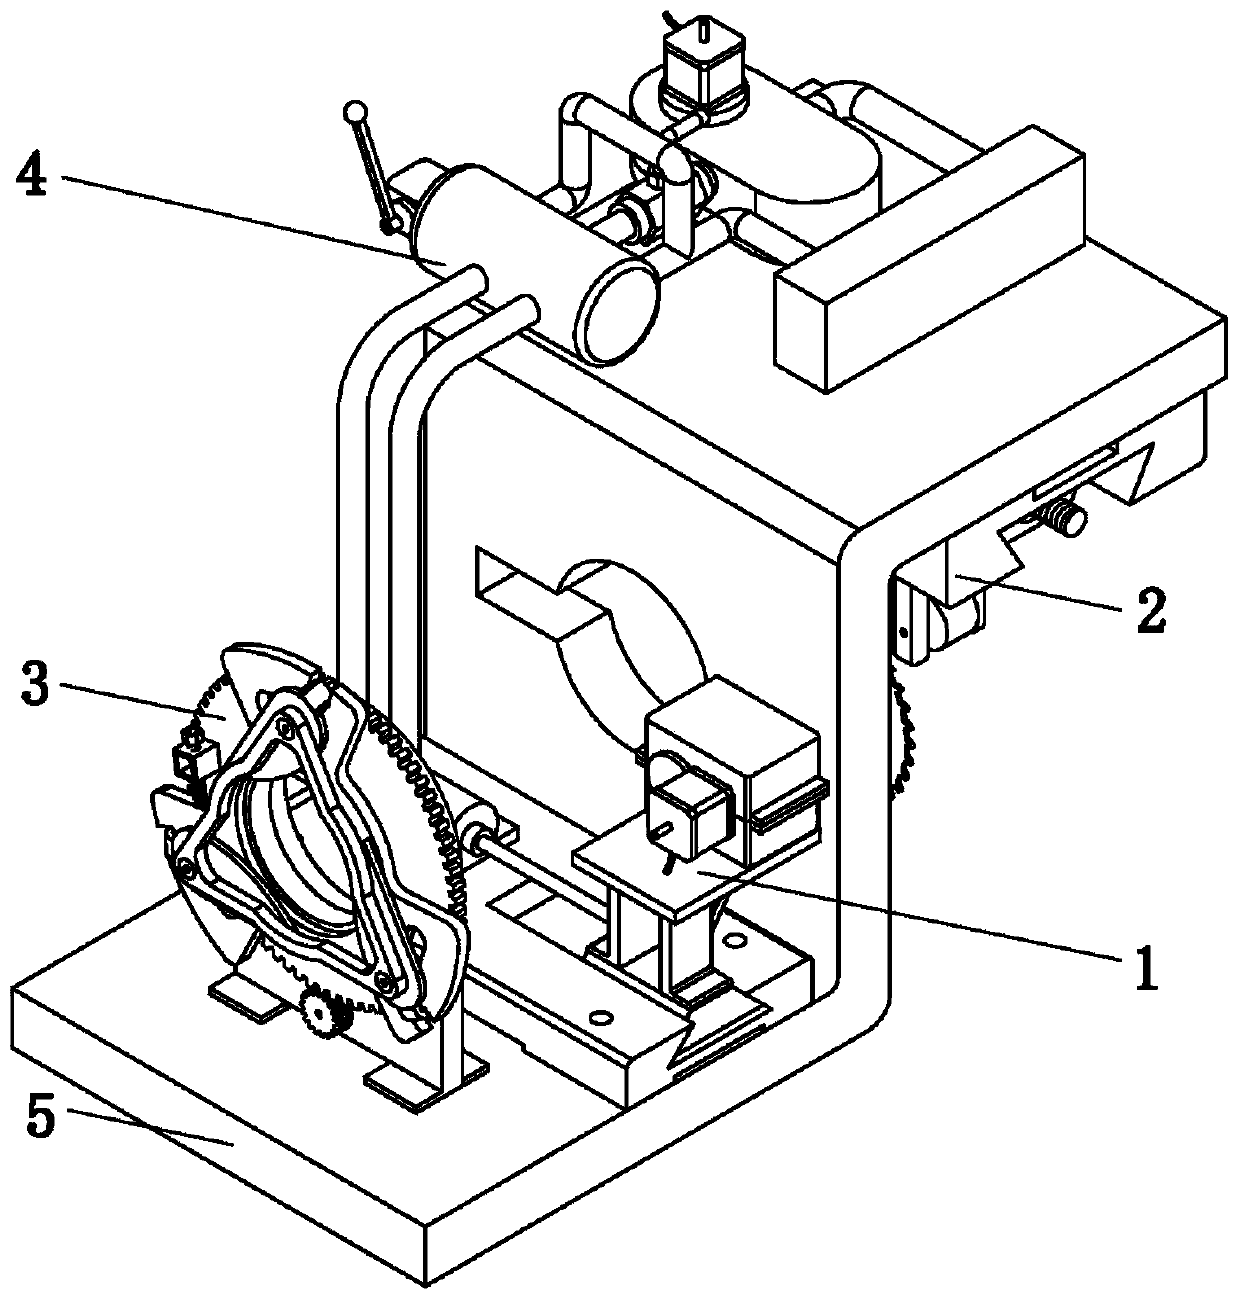 A metal pipe cutting device